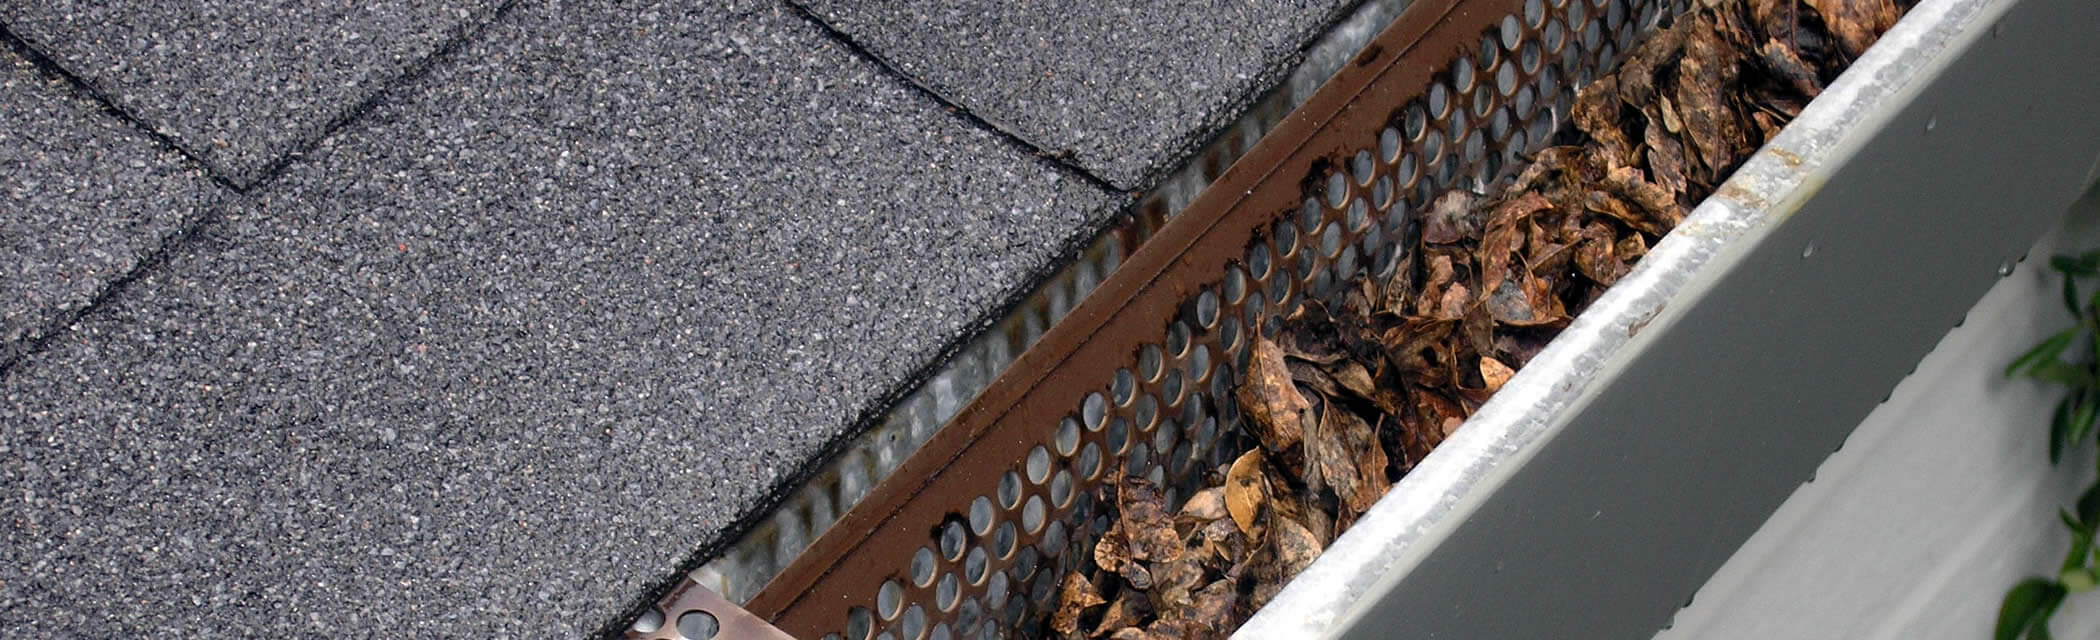 Professional Gutter Cleaning in Wake Forest & Raleigh NC